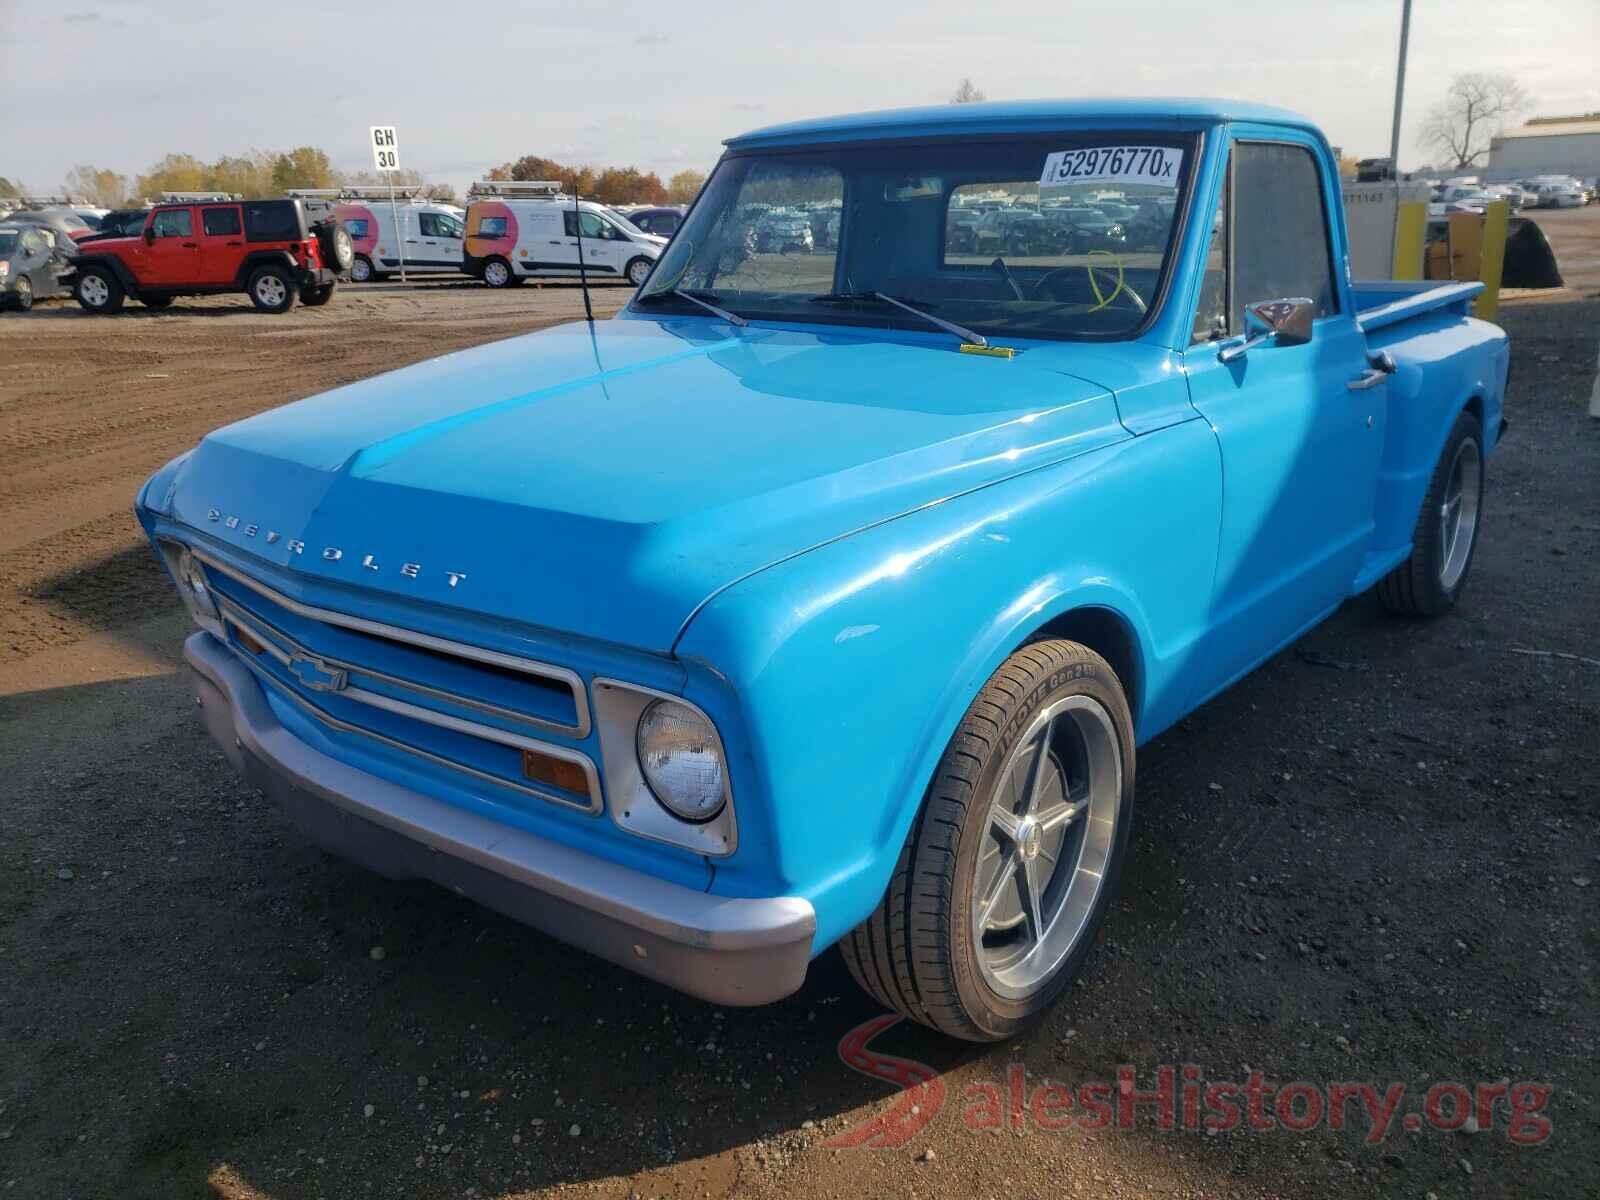 CS147A123157 1967 CHEVROLET ALL OTHER